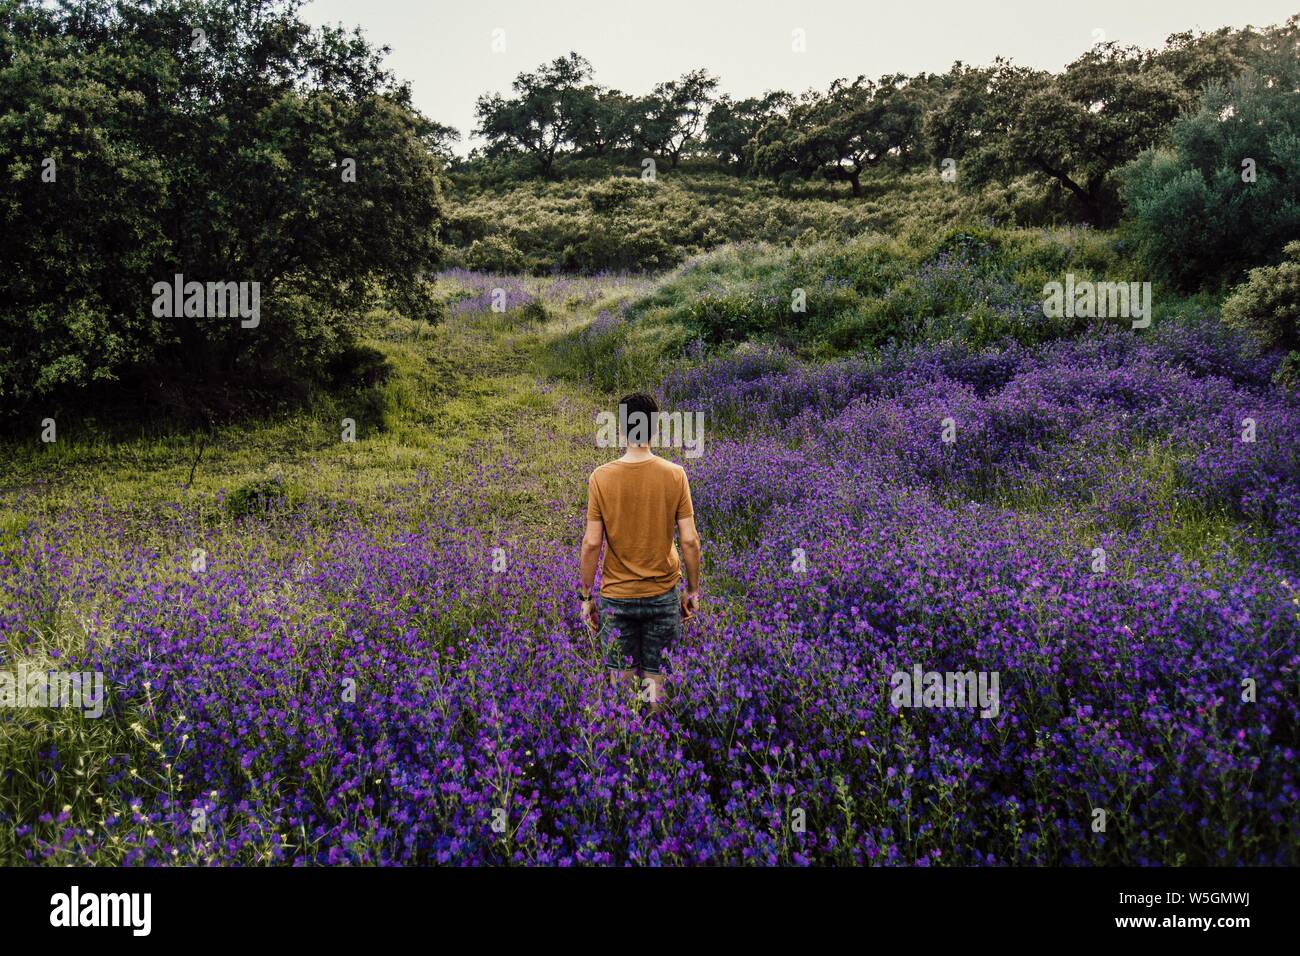 https://c8.alamy.com/comp/W5GMWJ/beautiful-long-shot-of-a-person-standing-amongst-a-pile-of-lavender-flowers-in-nature-W5GMWJ.jpg